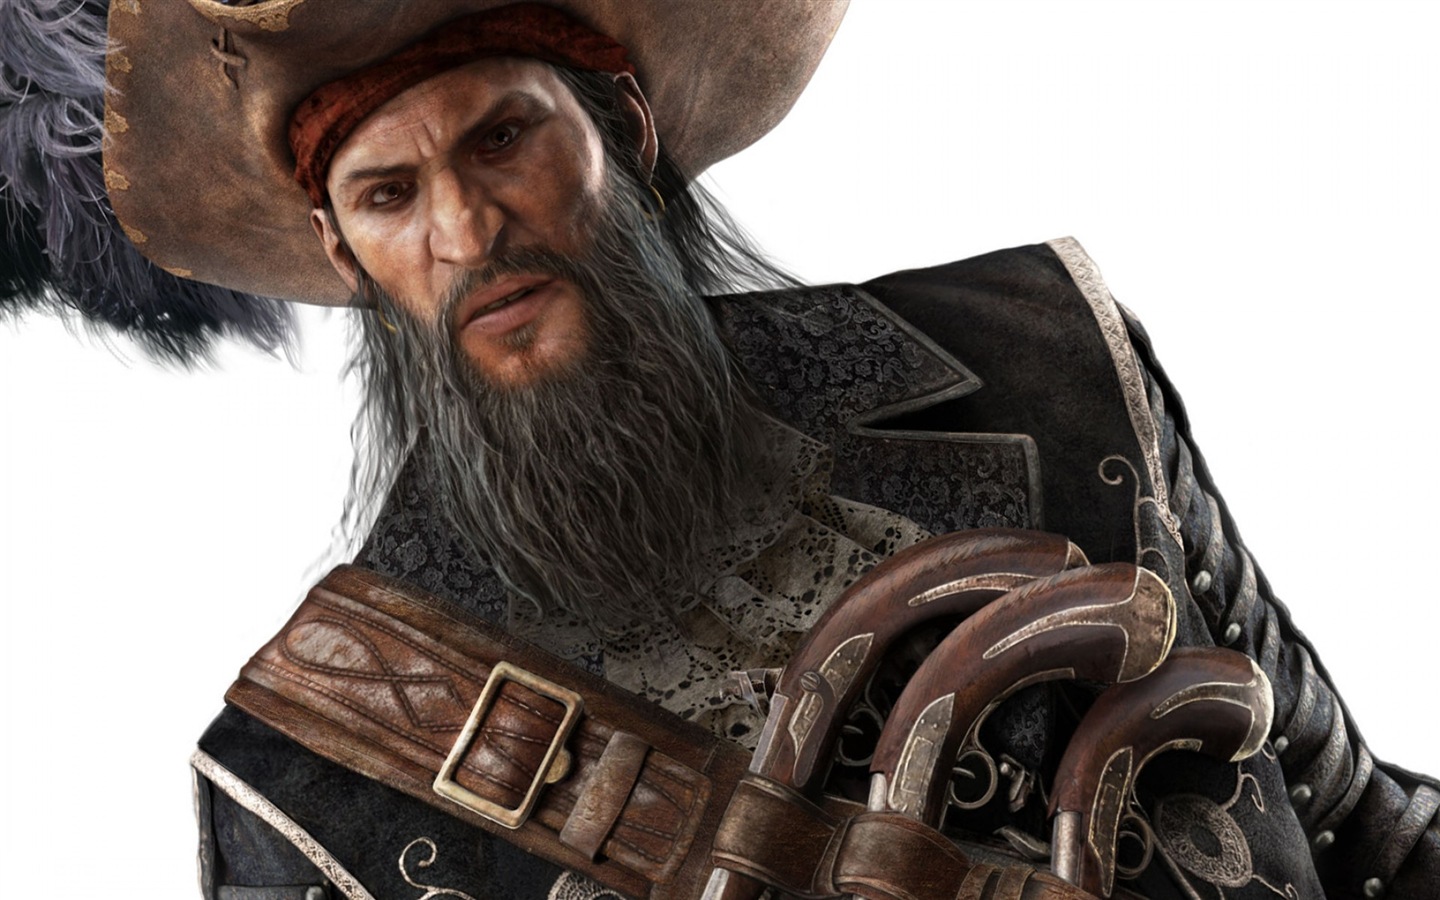 Creed IV Assassin: Black Flag HD wallpapers #11 - 1440x900